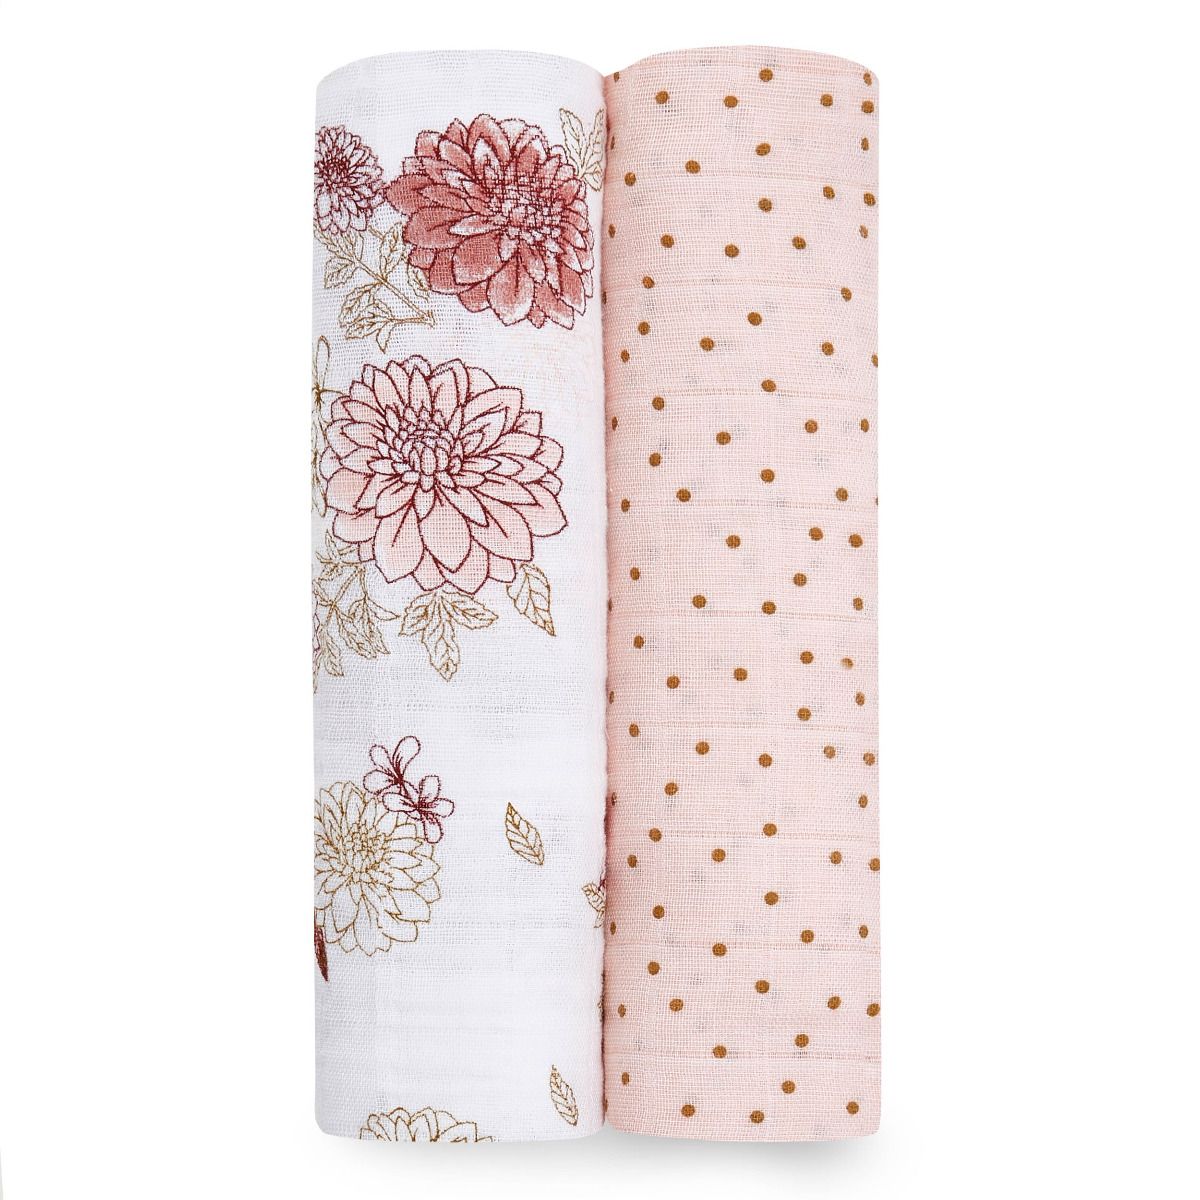 Aden + Anais 47" classic swaddle set 2-pack